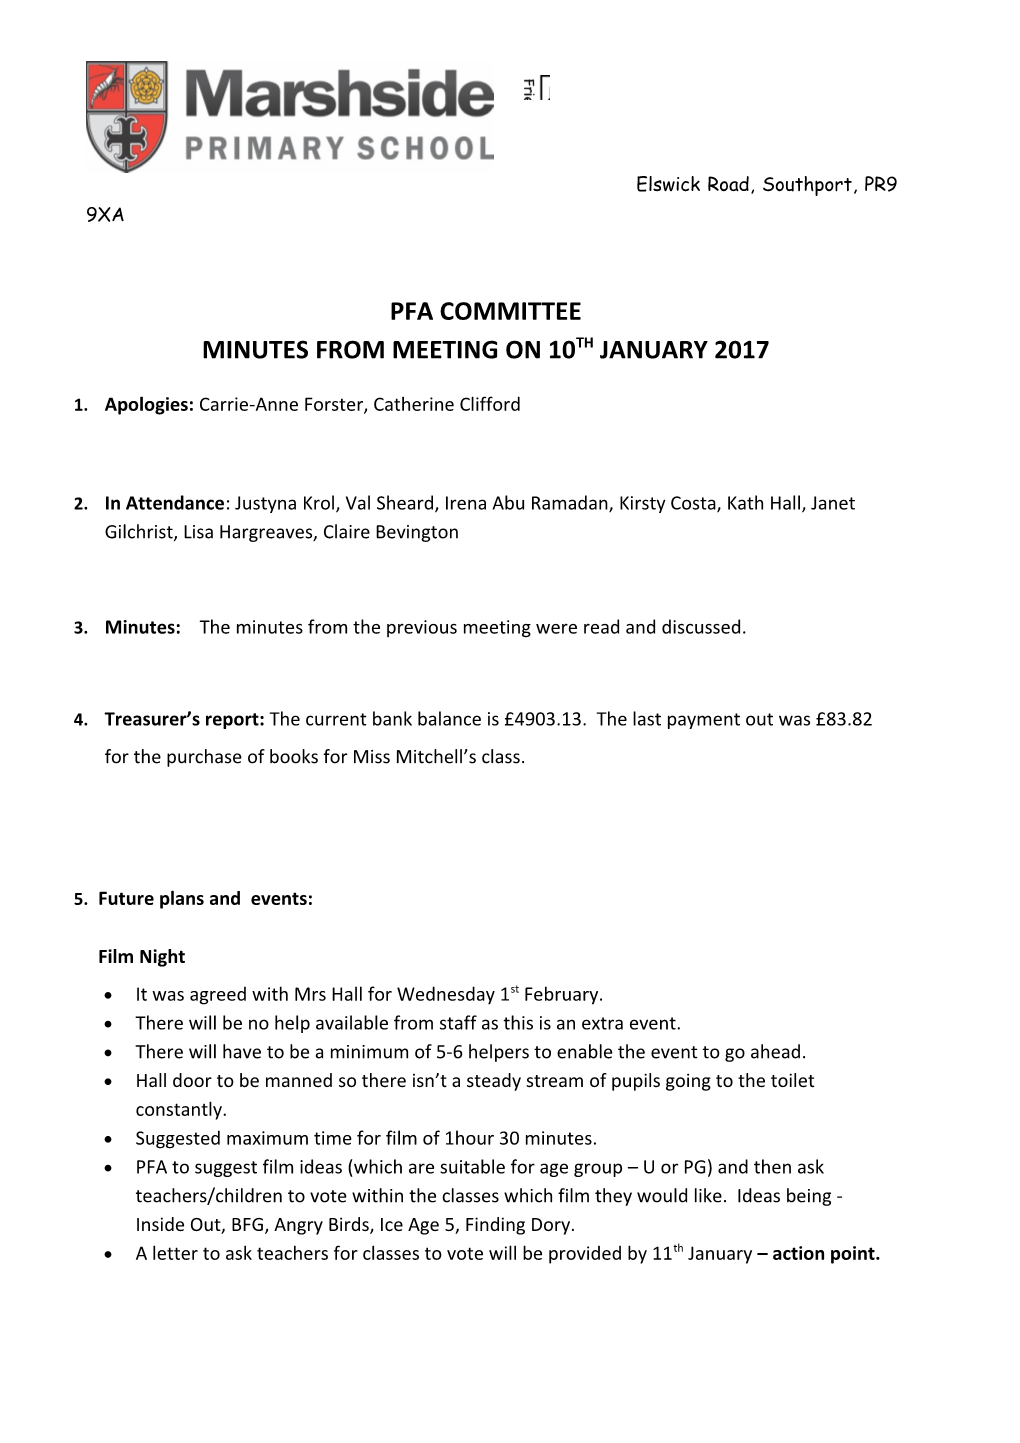 Minutes from Meeting on 10Thjanuary 2017